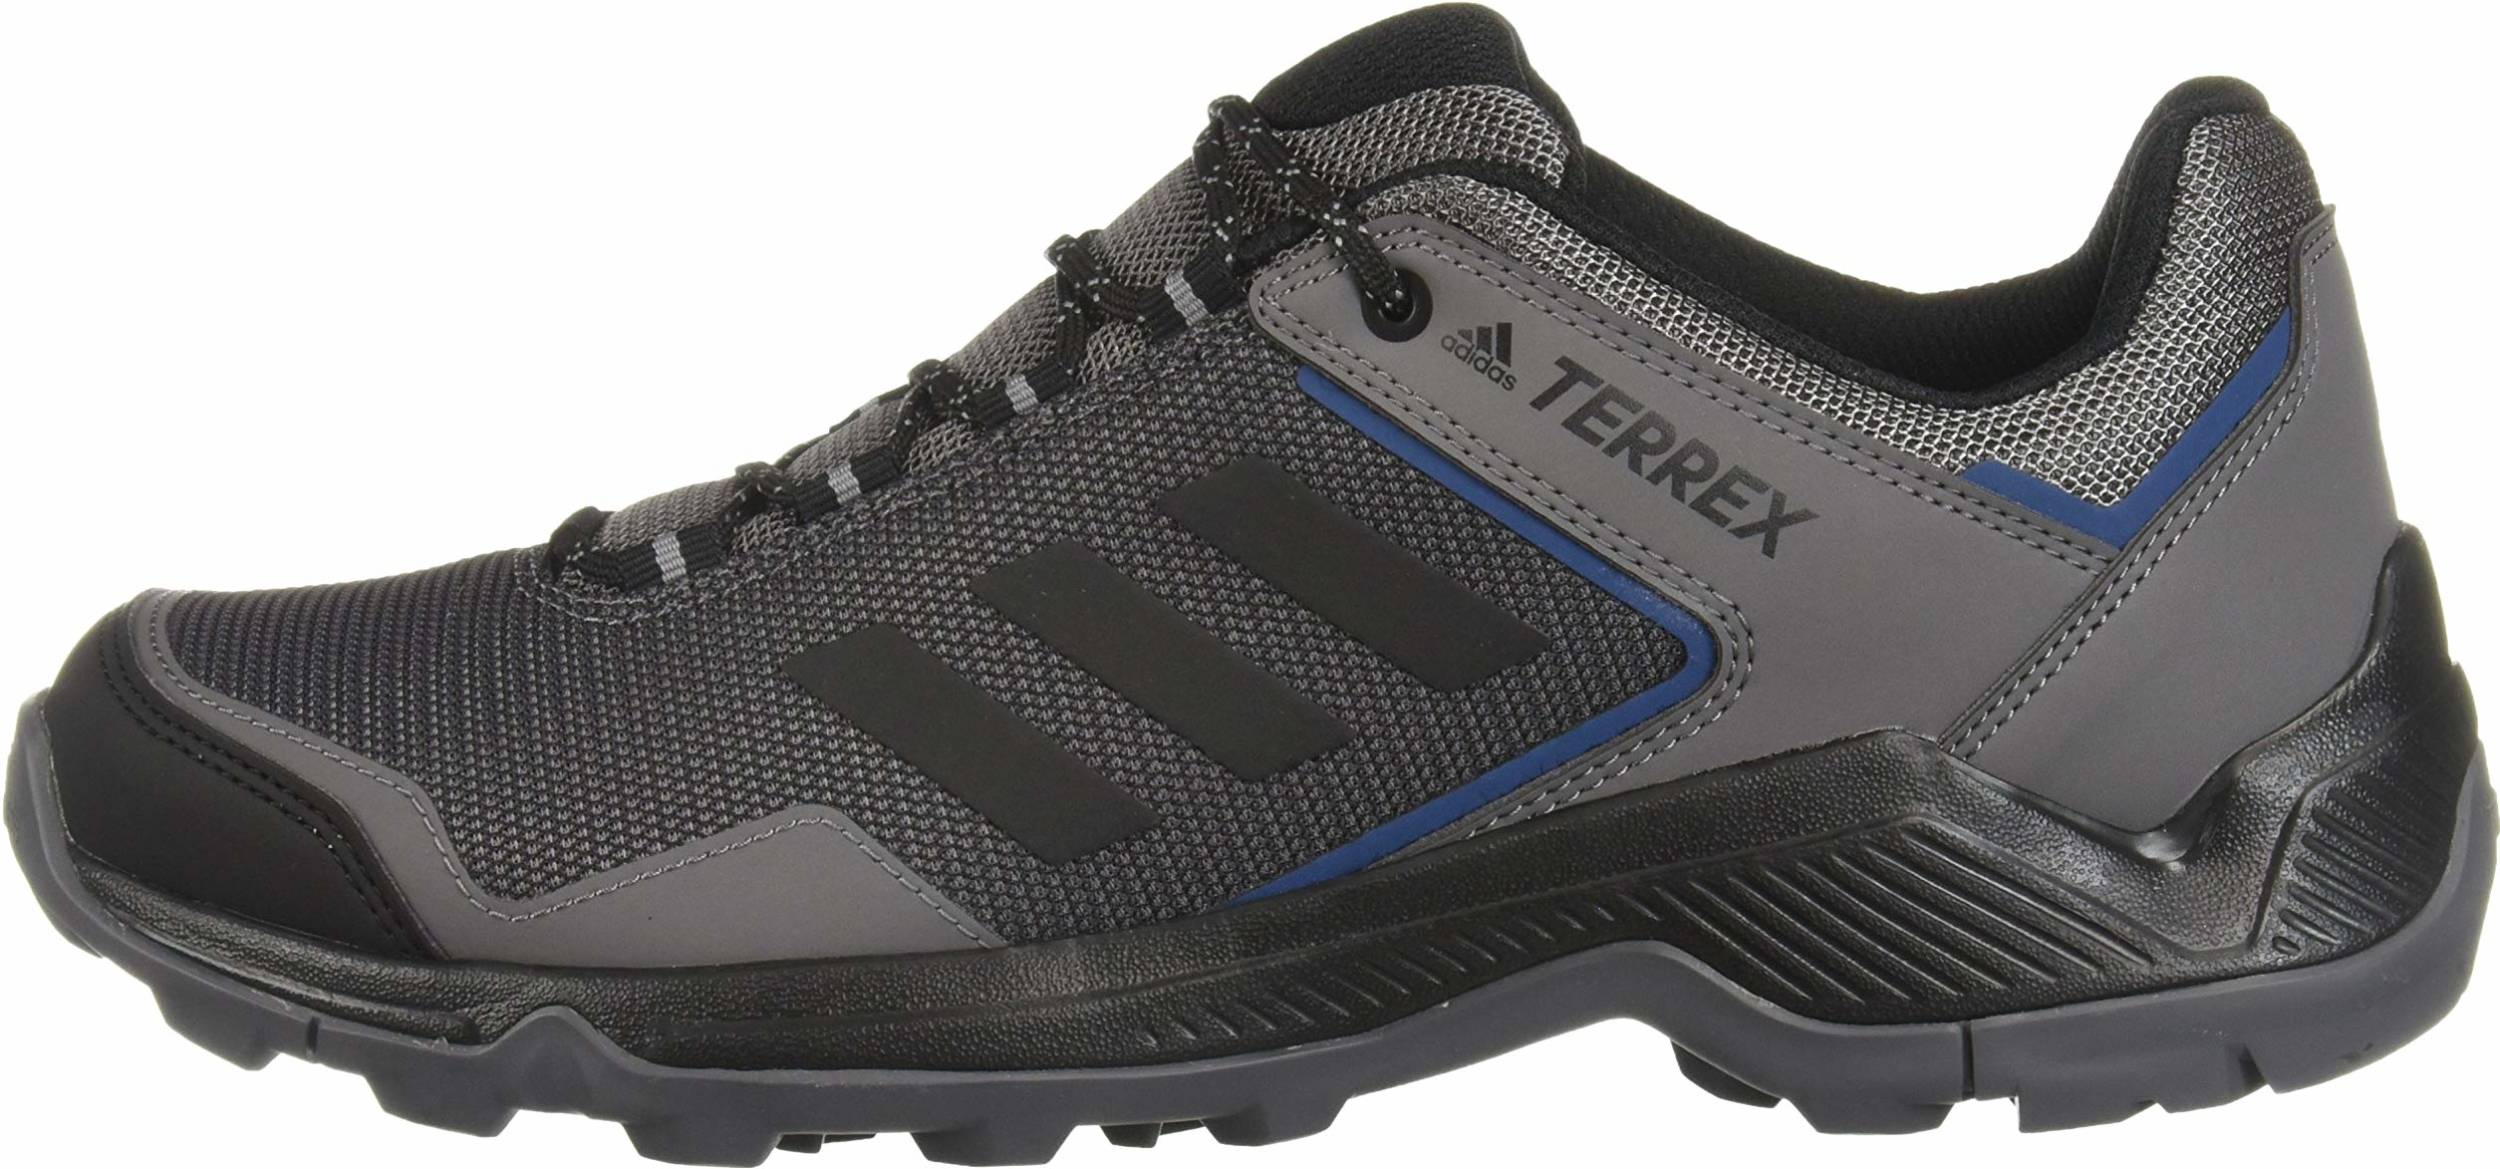 Only $65 + Review of Adidas Terrex Eastrail | RunRepeat